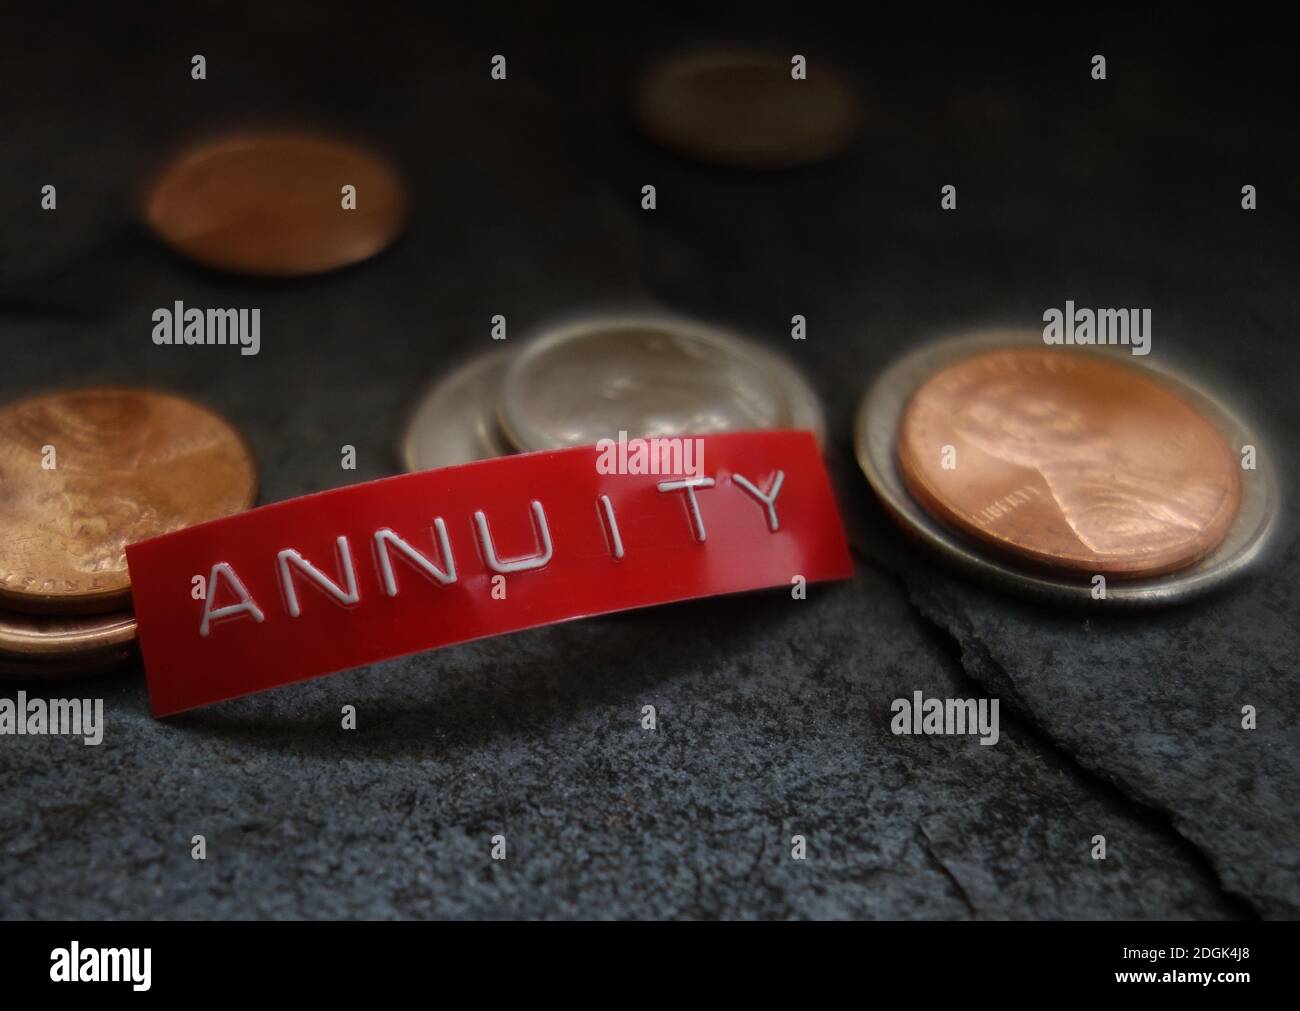 Annuity investment concept Stock Photo